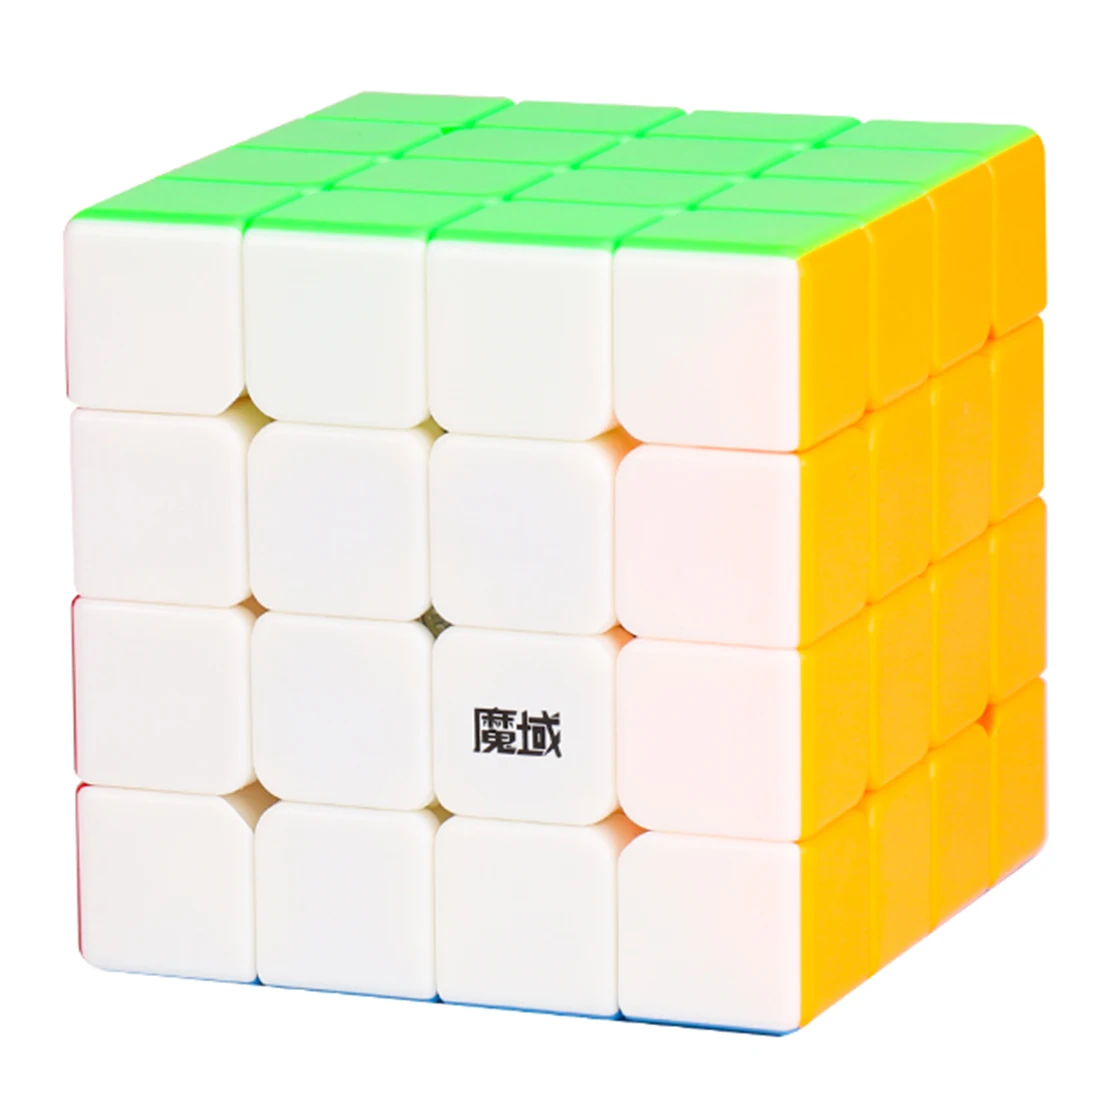 Aosu GTS2M MoYu GTS2 4x4x4 Cube and V2 4x4 Magnetic Cube Puzzle Professional Aosu GTS 2 M Speed Cube Educational Kid Toys велосипед cube kid 200 girl white´n´pink 2018 cube